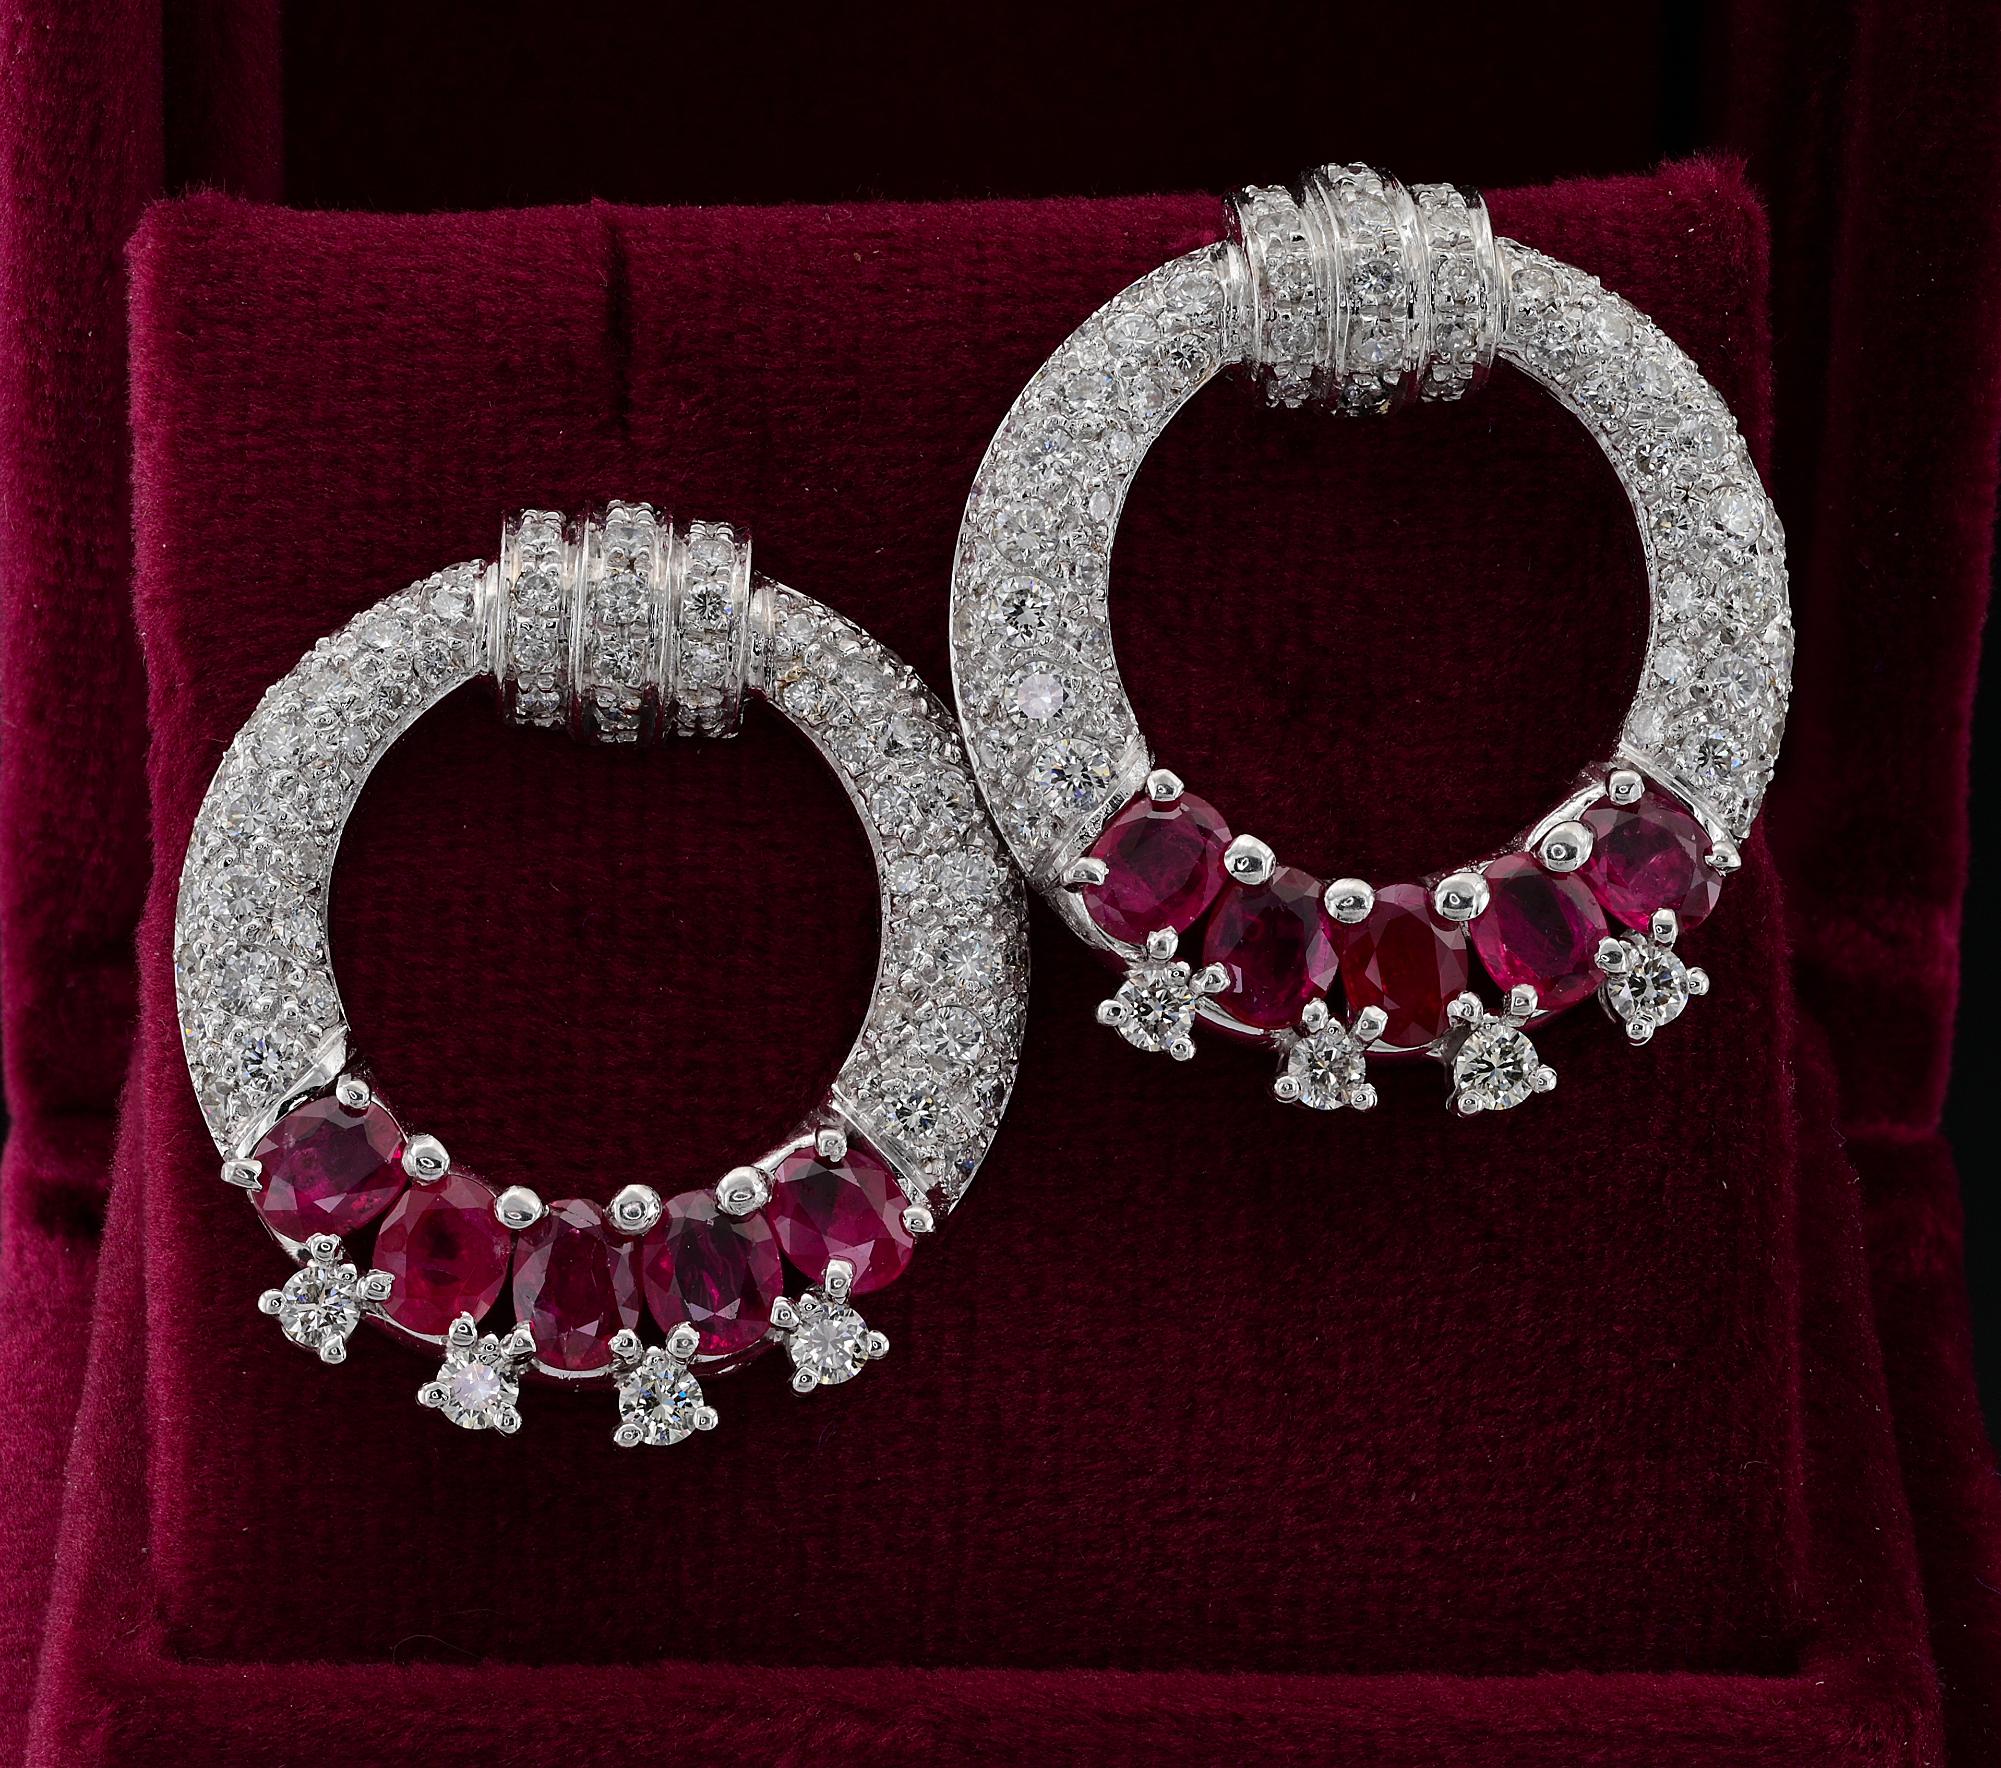 Estate large hoop earrings, beautifully hand crafted as unique
Pave set with 2.90 Ct round brilliant cut Diamonds G VVS/VS
Enhanced in the middle by an array of Natural Rubies totalling 4.35 Ct making a lovely colour contrast and effective look
They